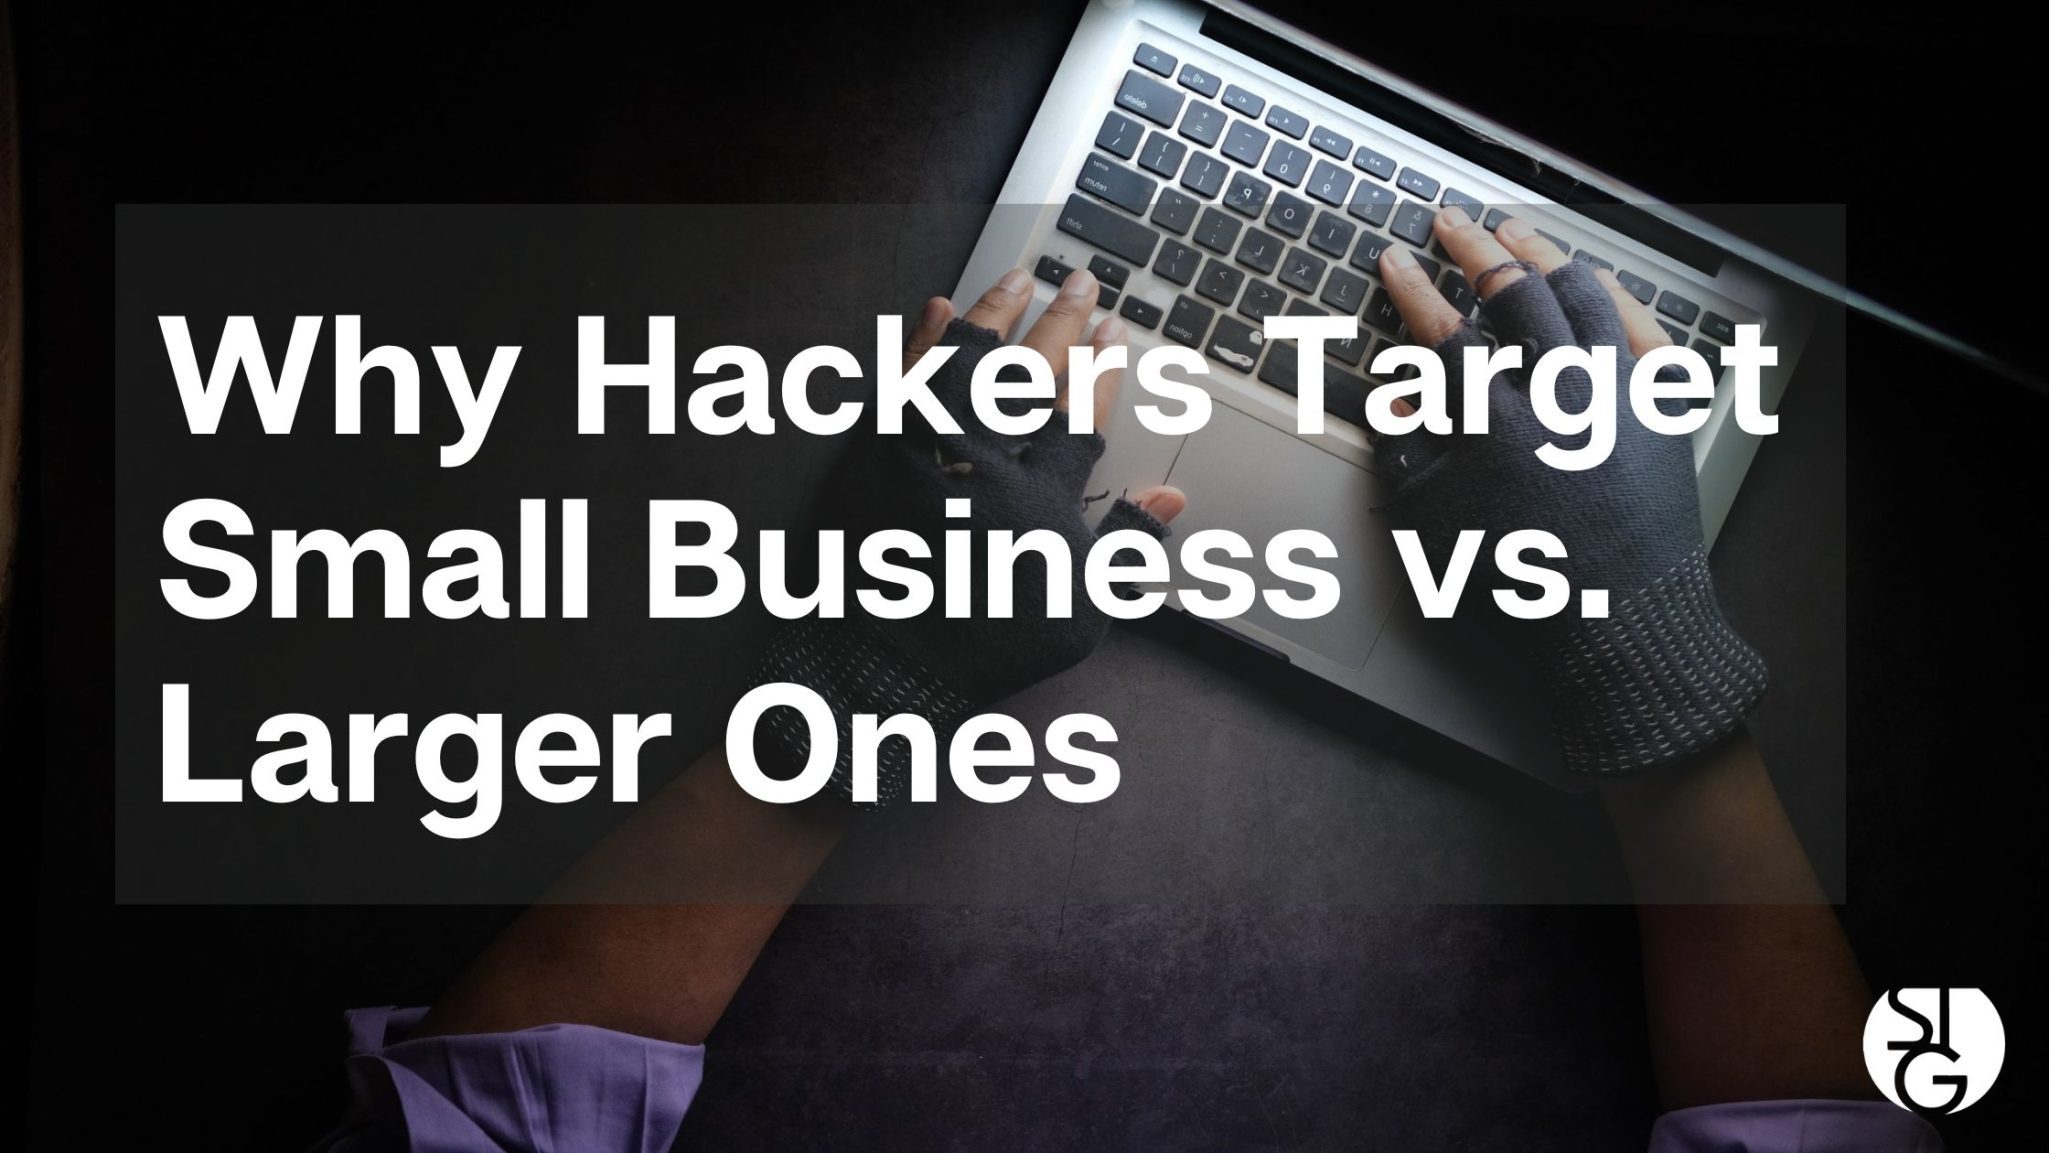 Small Businesses Are Hacked 3x More Than Larger Ones